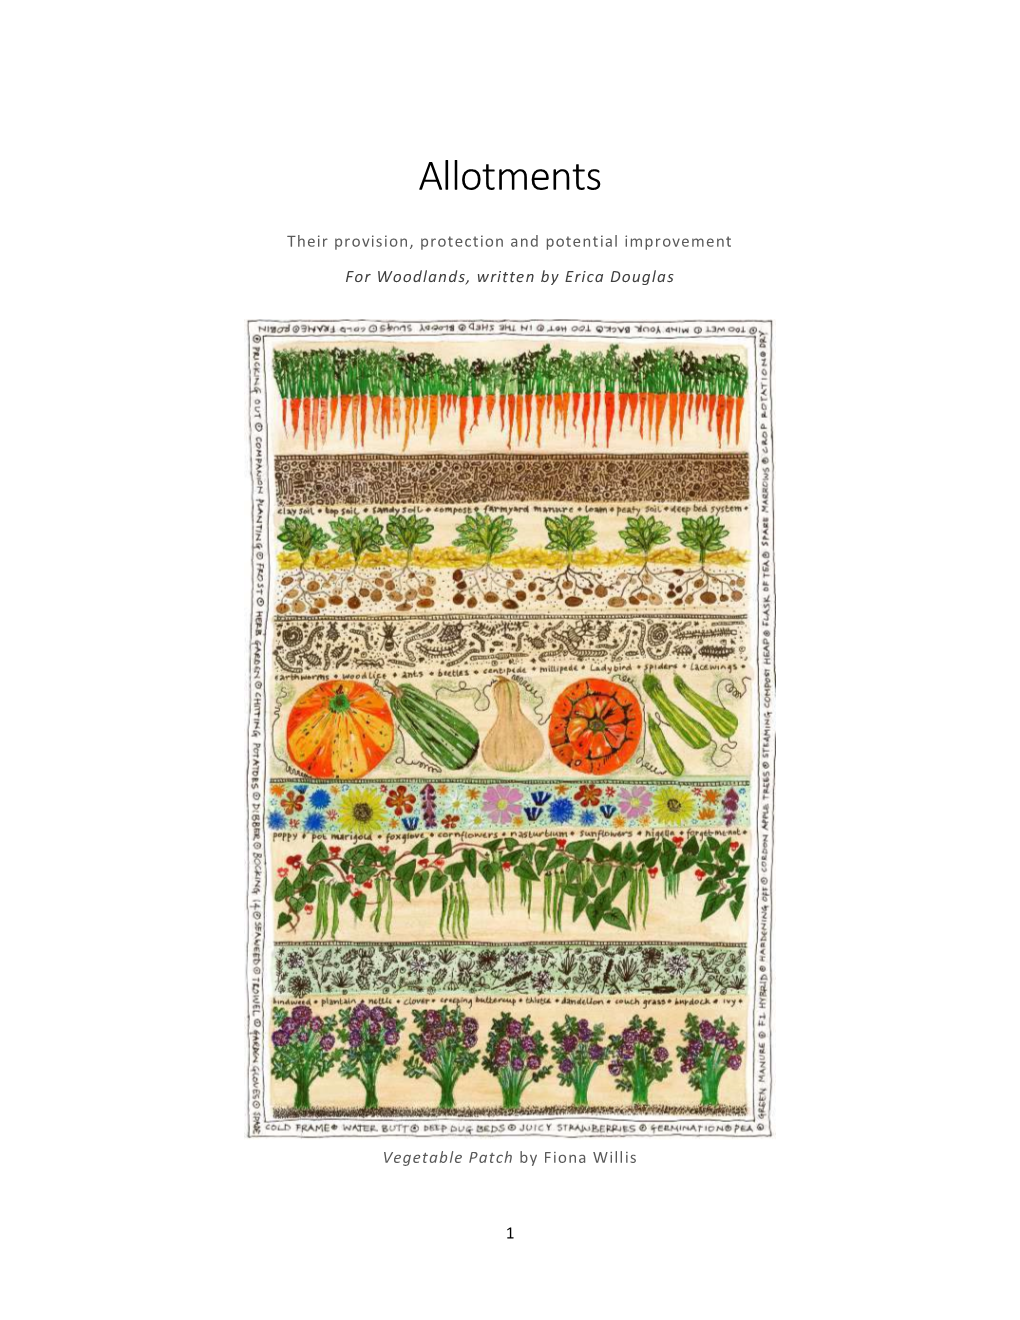 Allotments: Their Provision, Protection and Potential Improvement